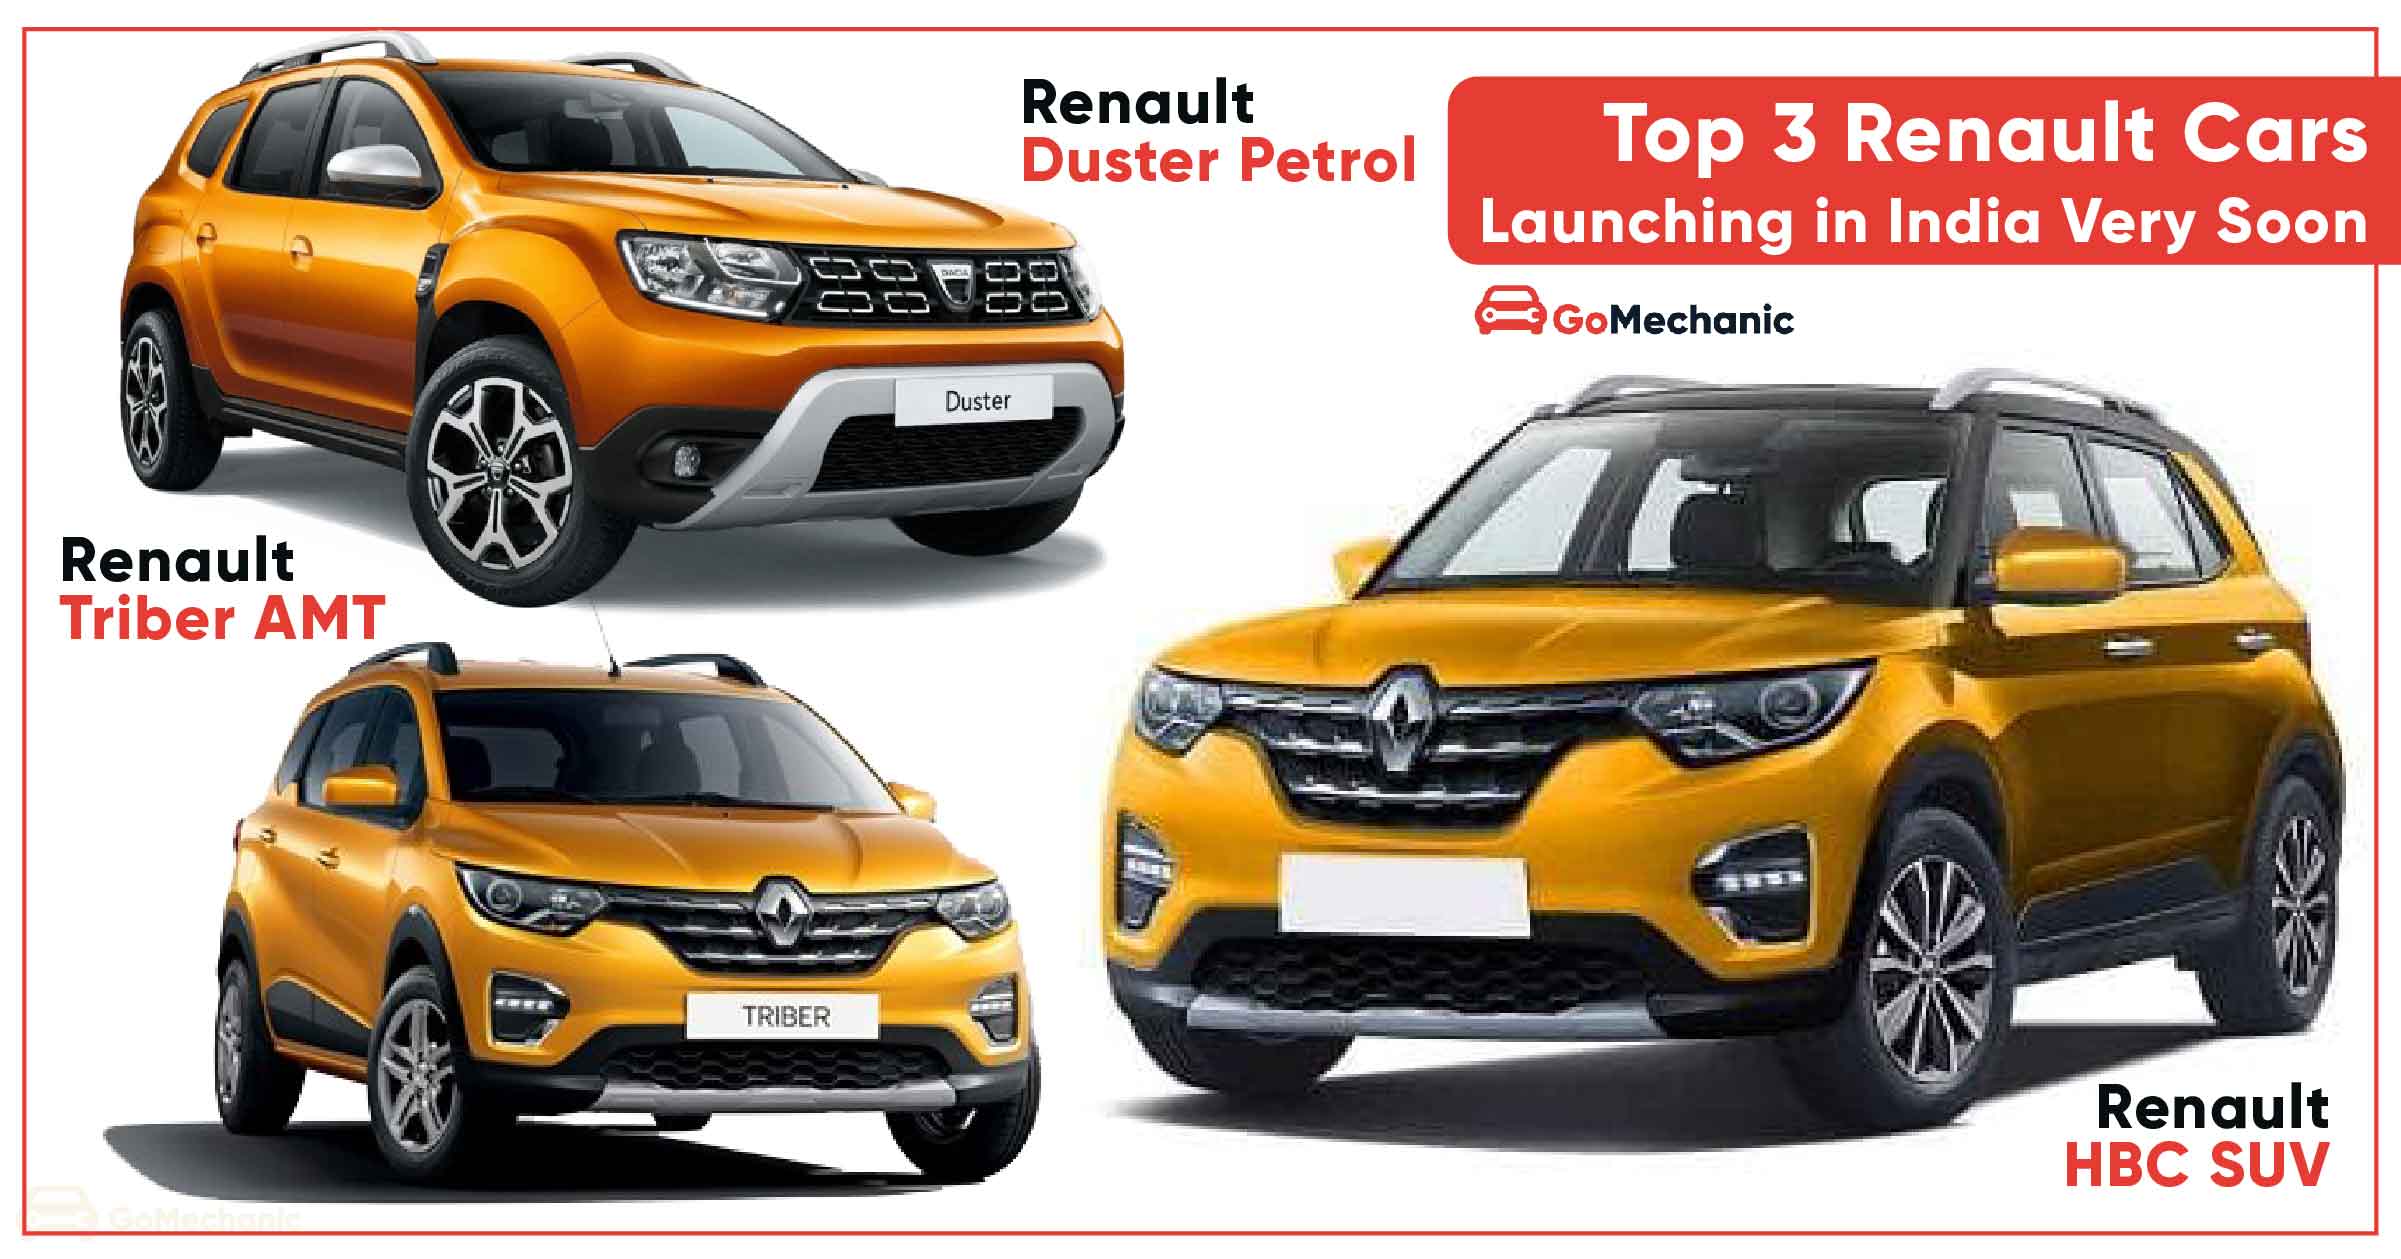 3 Renault cars launching soon in India